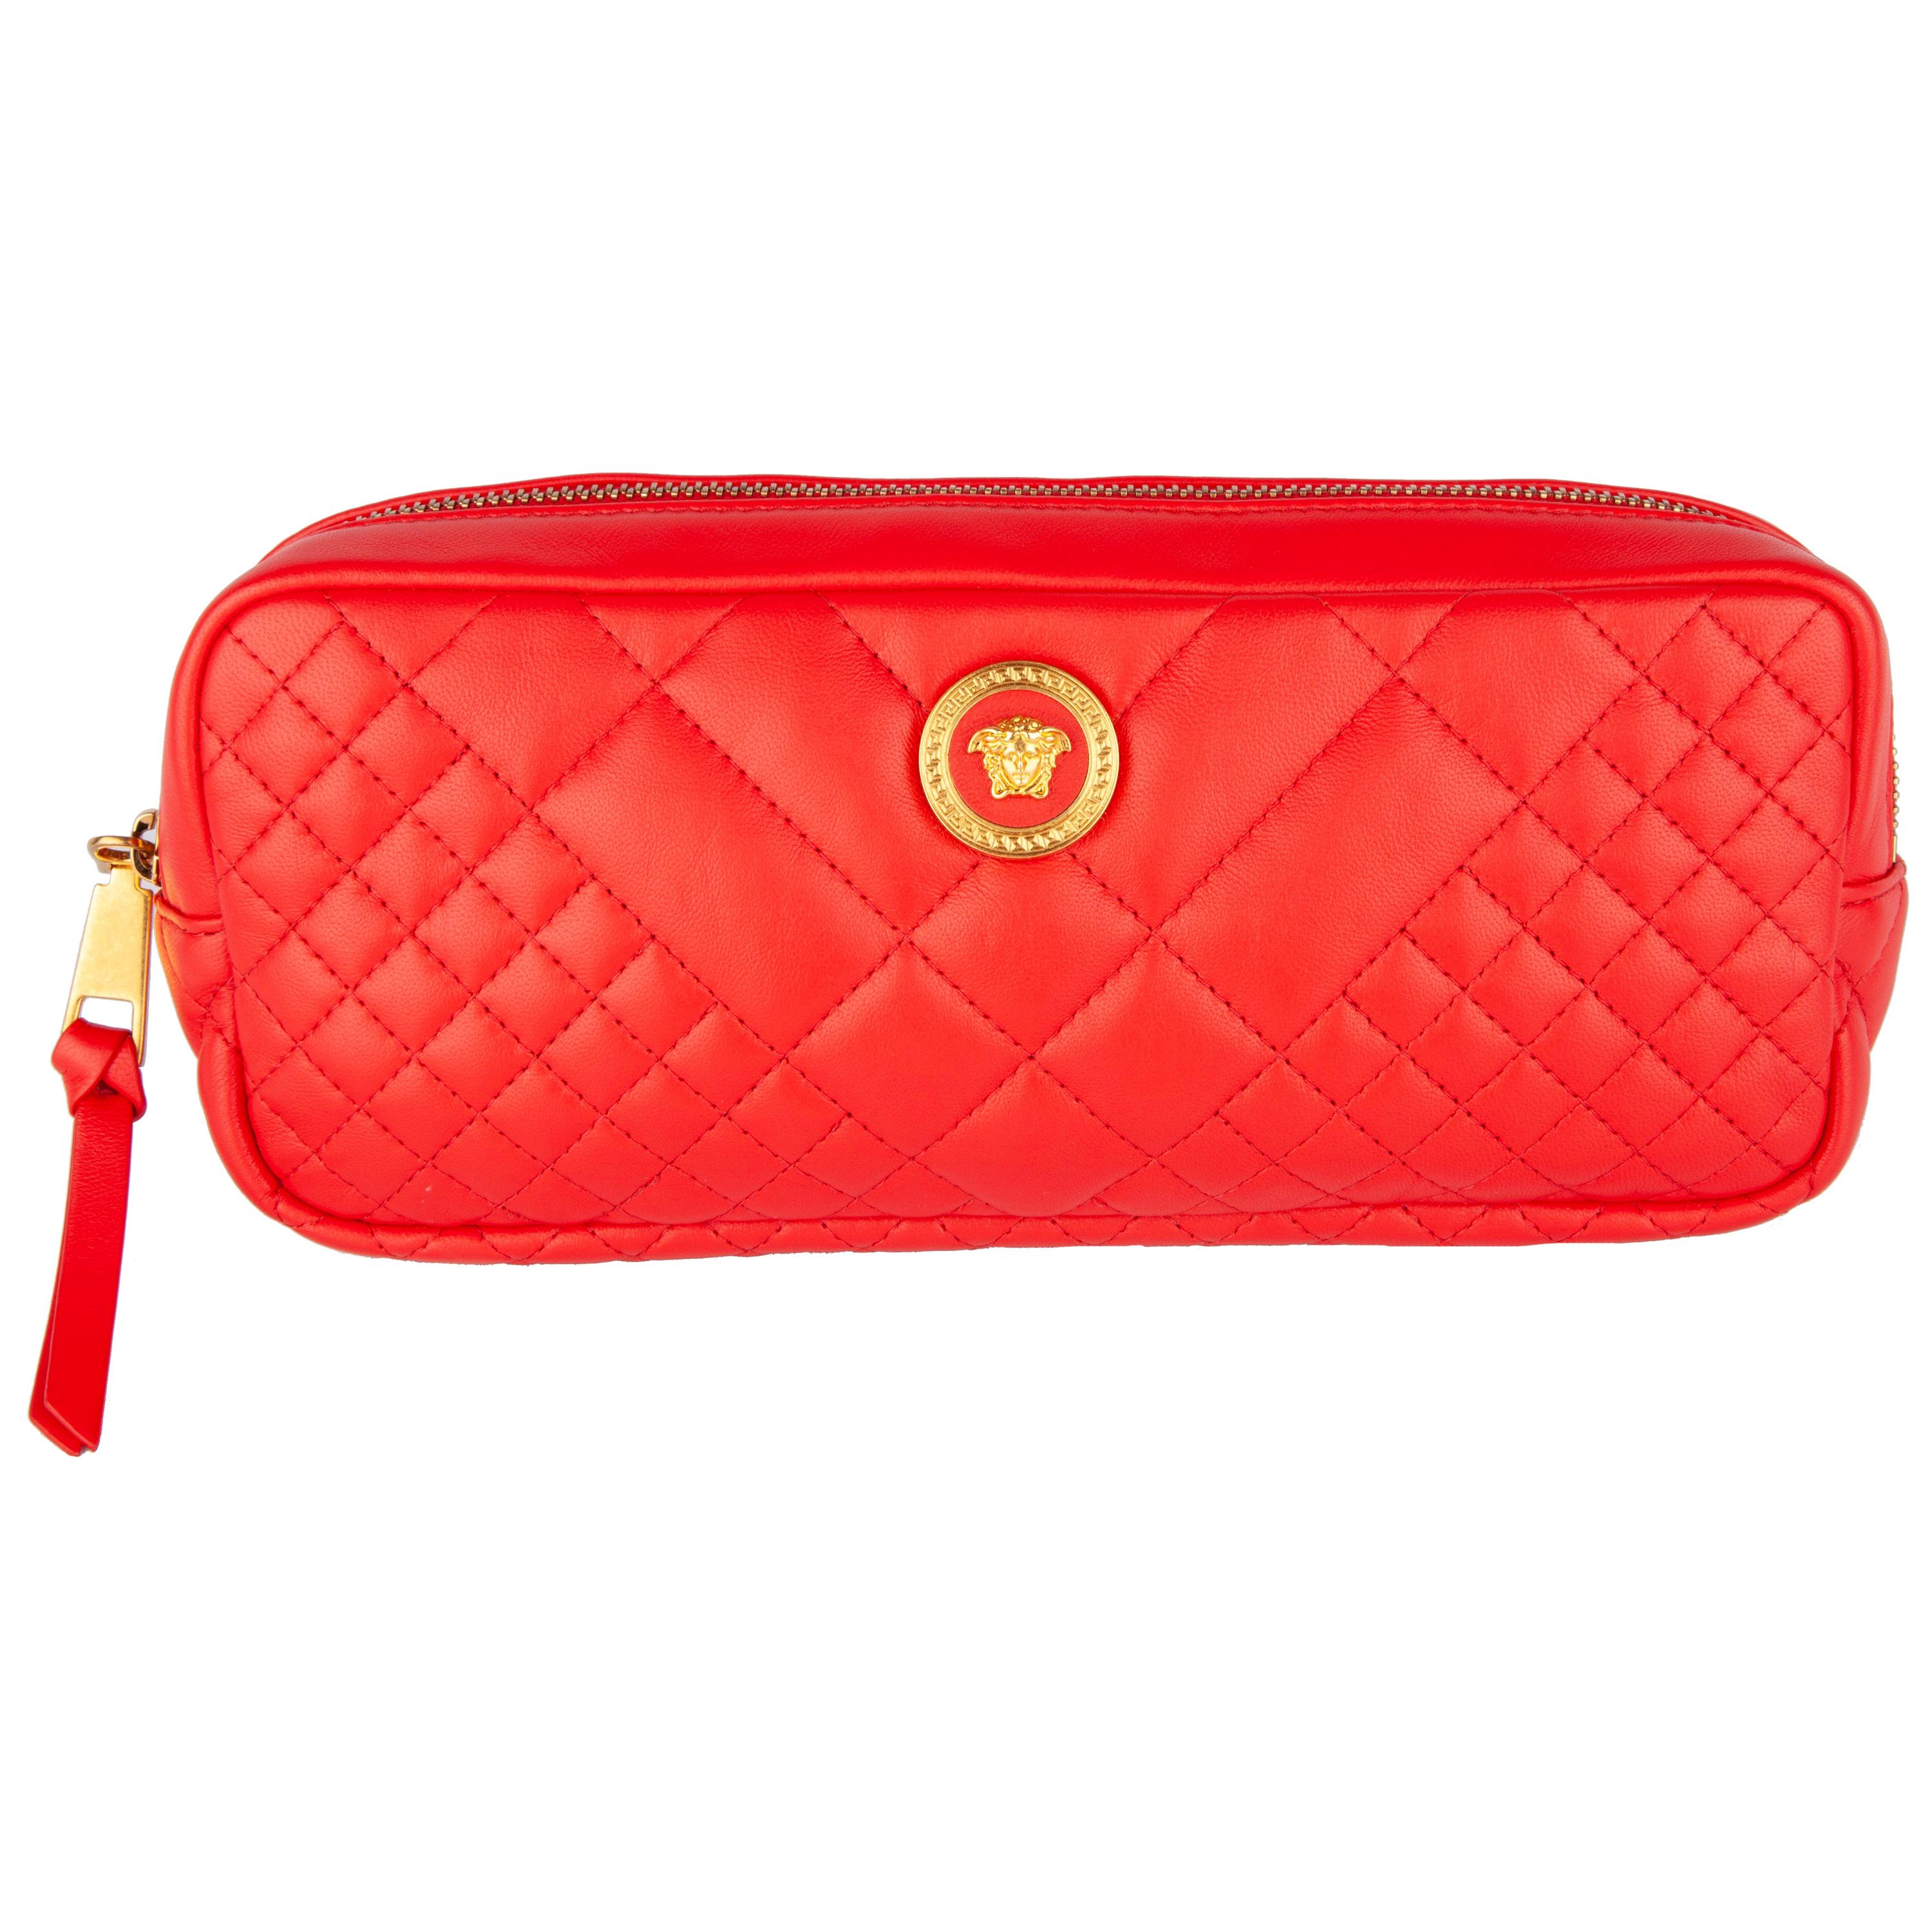 Versace Red Quilted Leather Icon Medusa Tribute Belt Bag